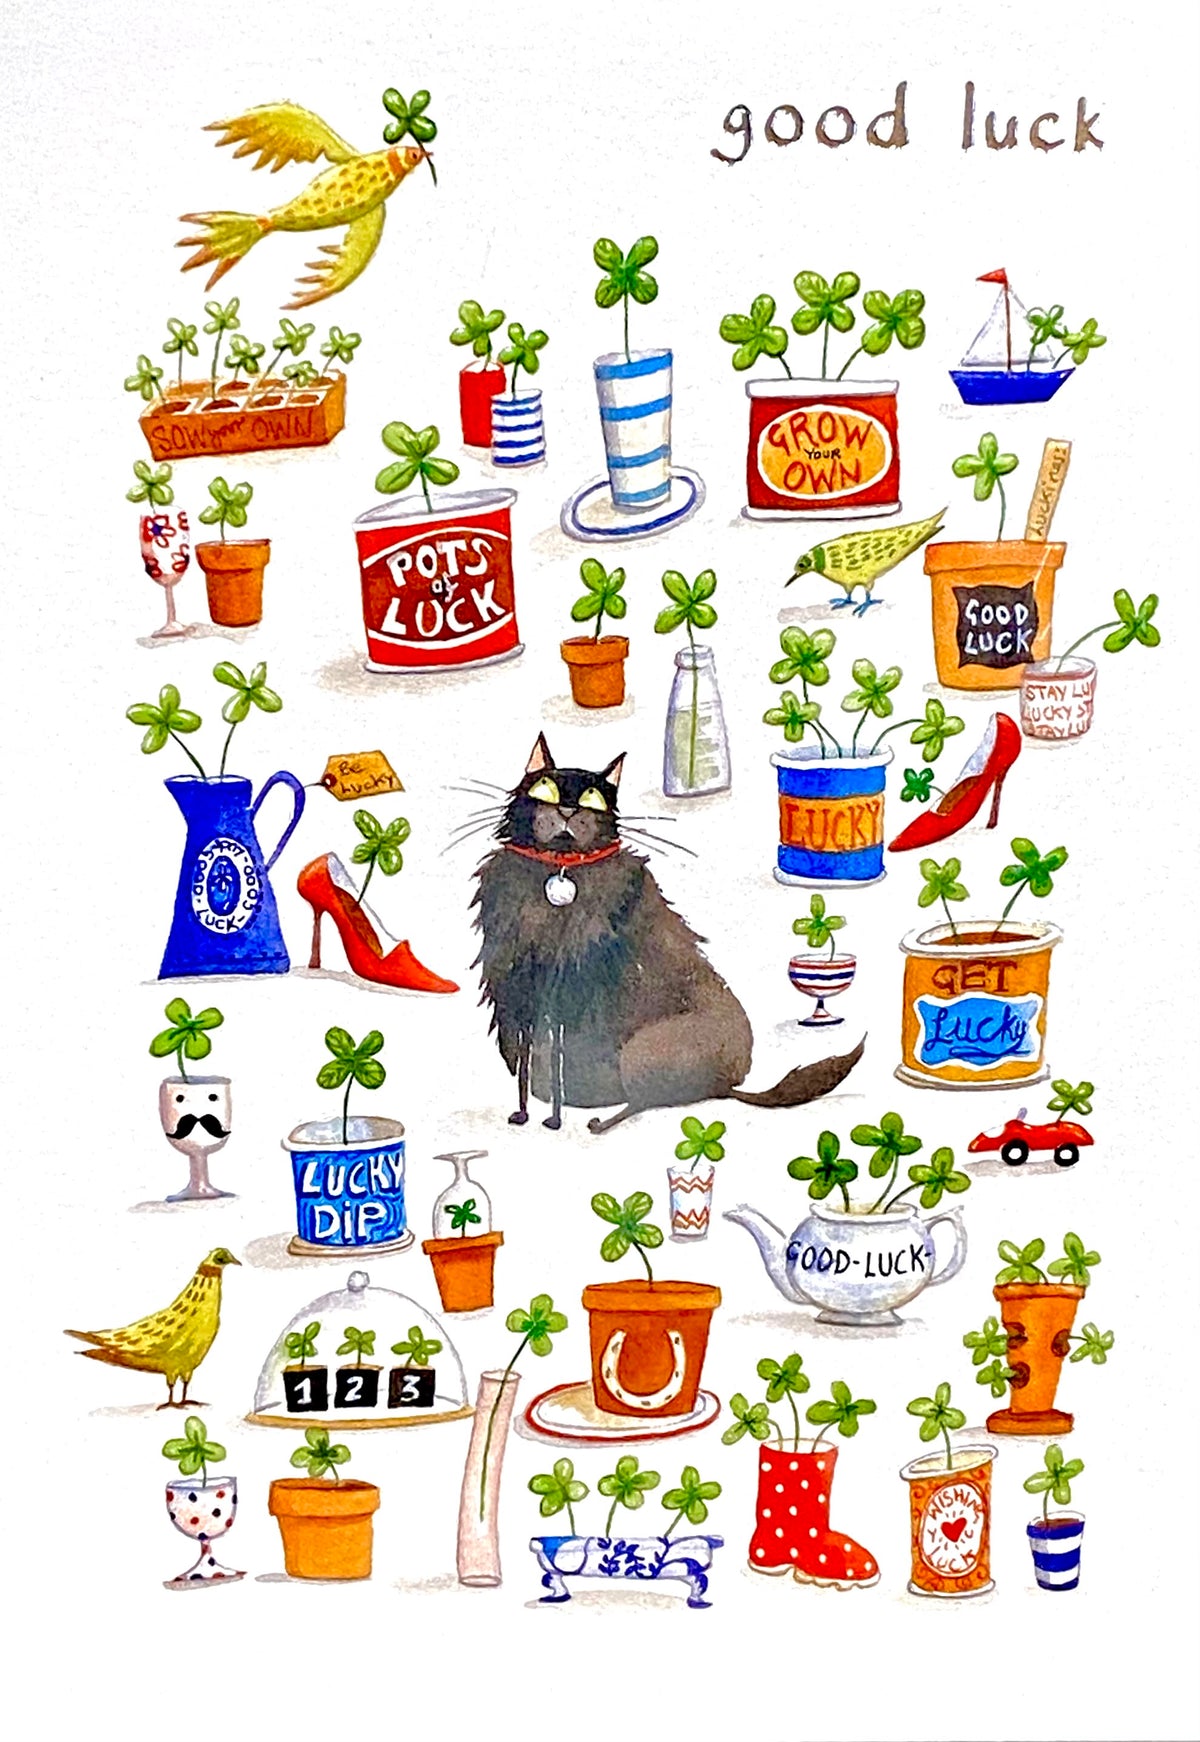 Good Luck Card- Black Cat With Good Luck Charms